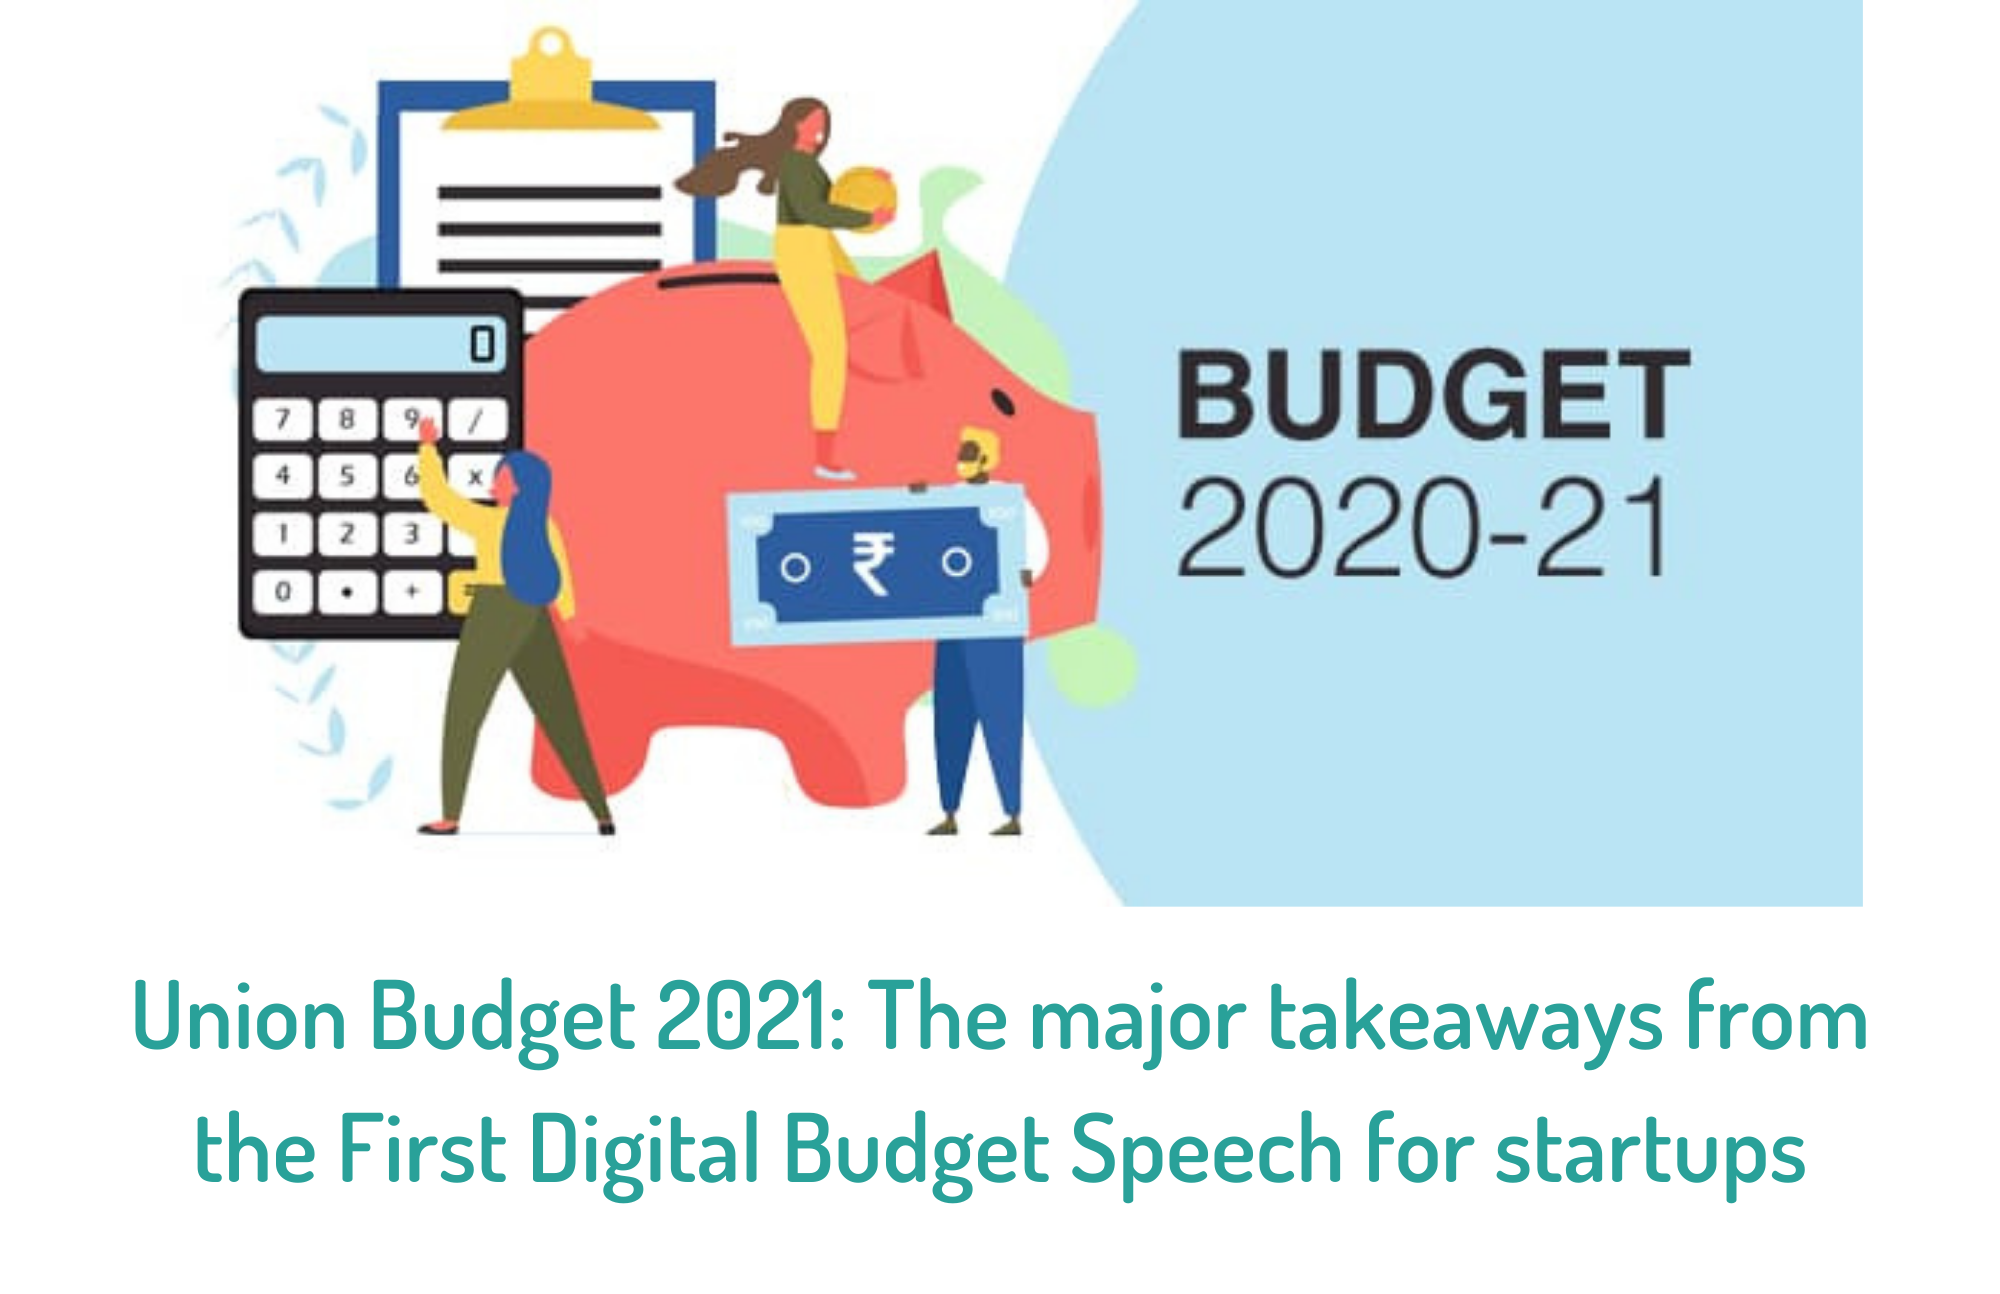 Union Budget 2021: The major takeaways from the First Digital Budget Speech for startups